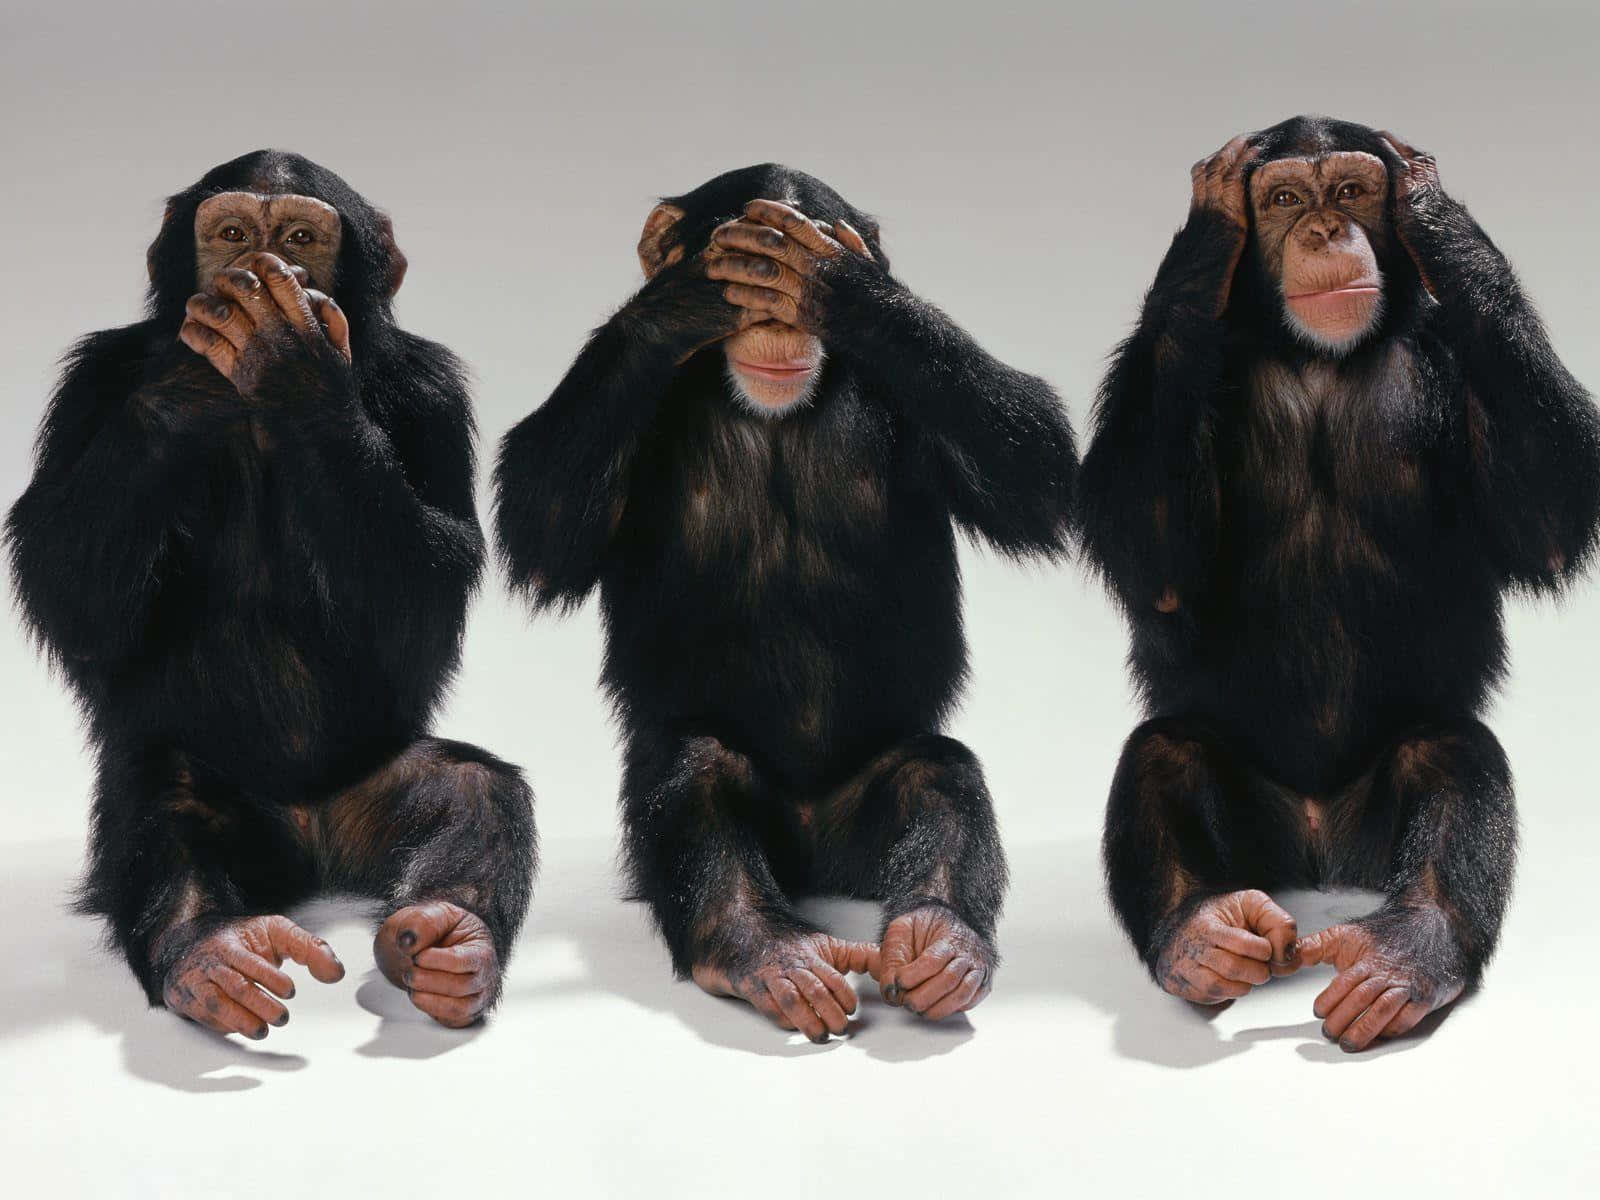 Three Chimpanzees With Their Hands Covering Their Eyes